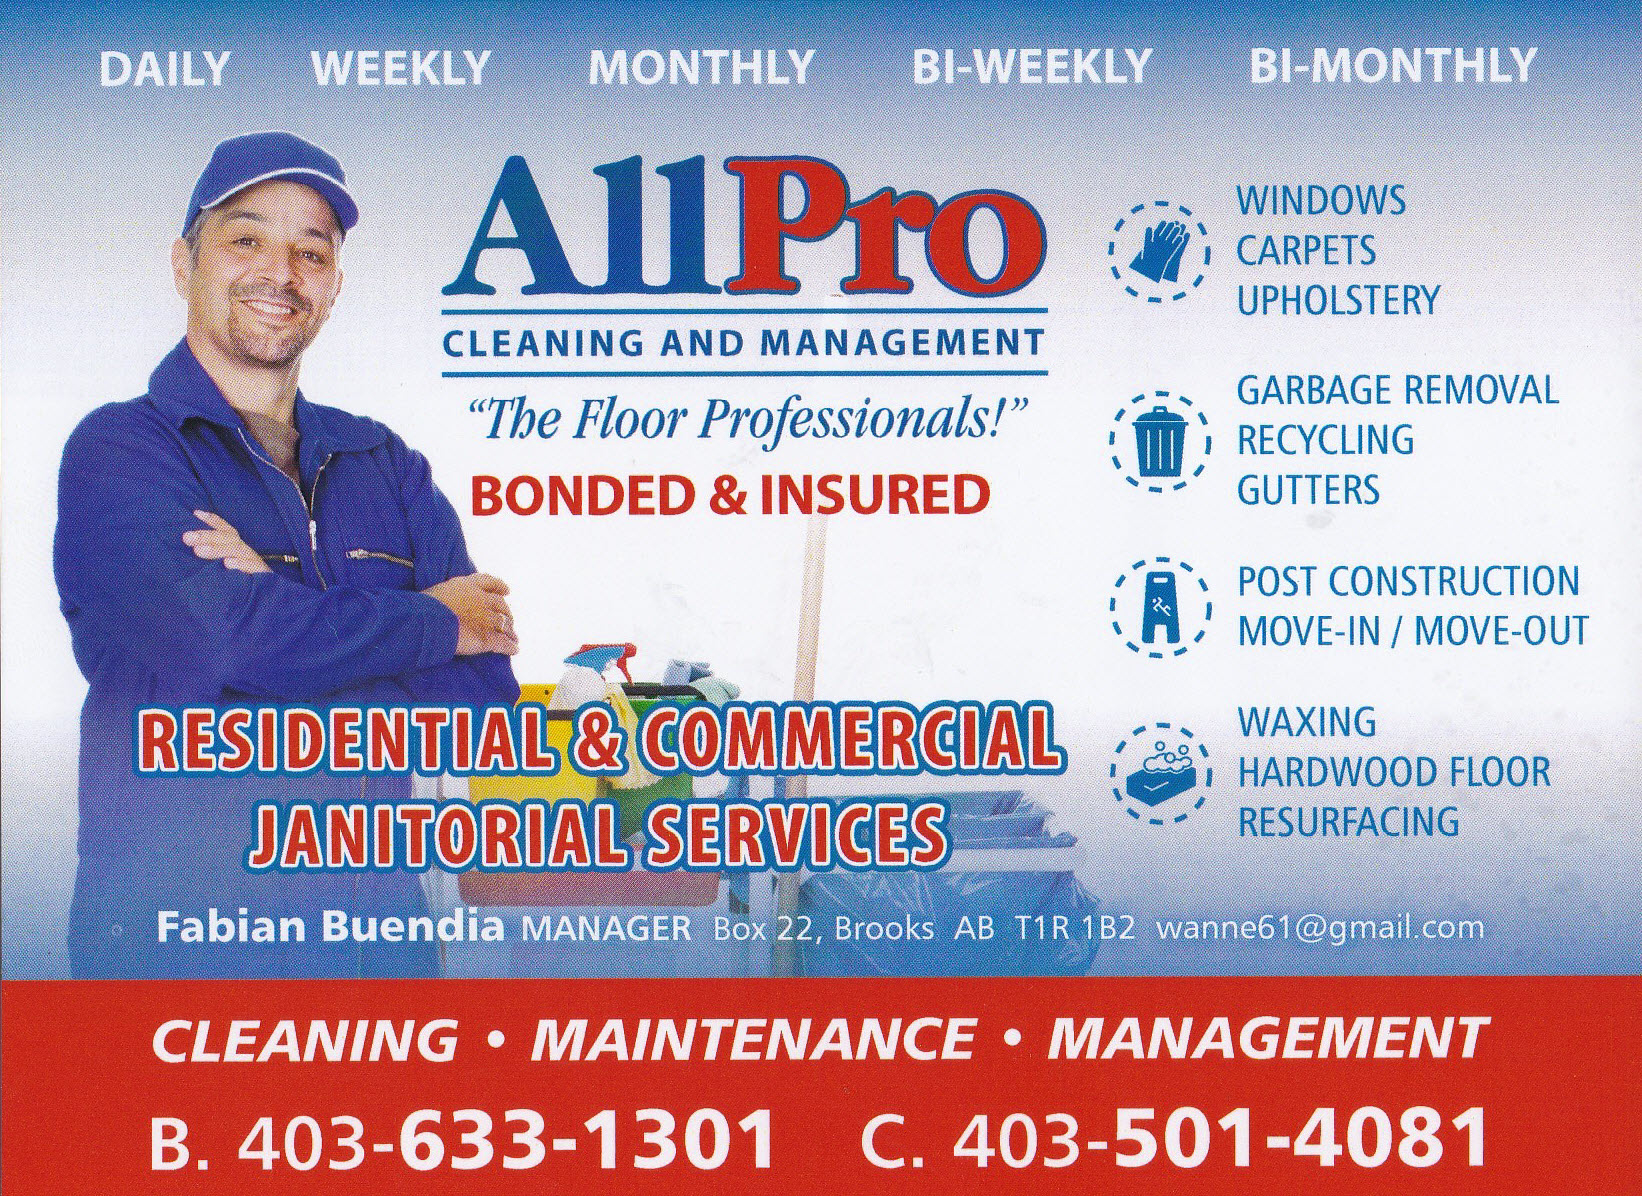 All Pro Cleaning & Management